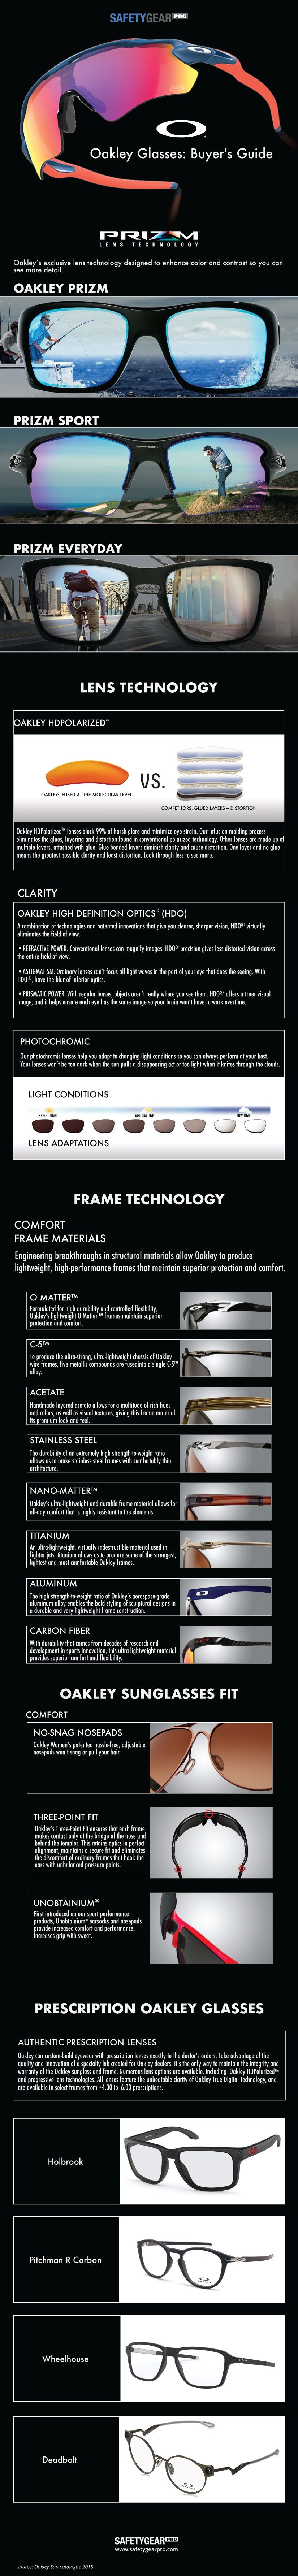 A Guide To Buying the Right Oakley Glasses for You Infographic